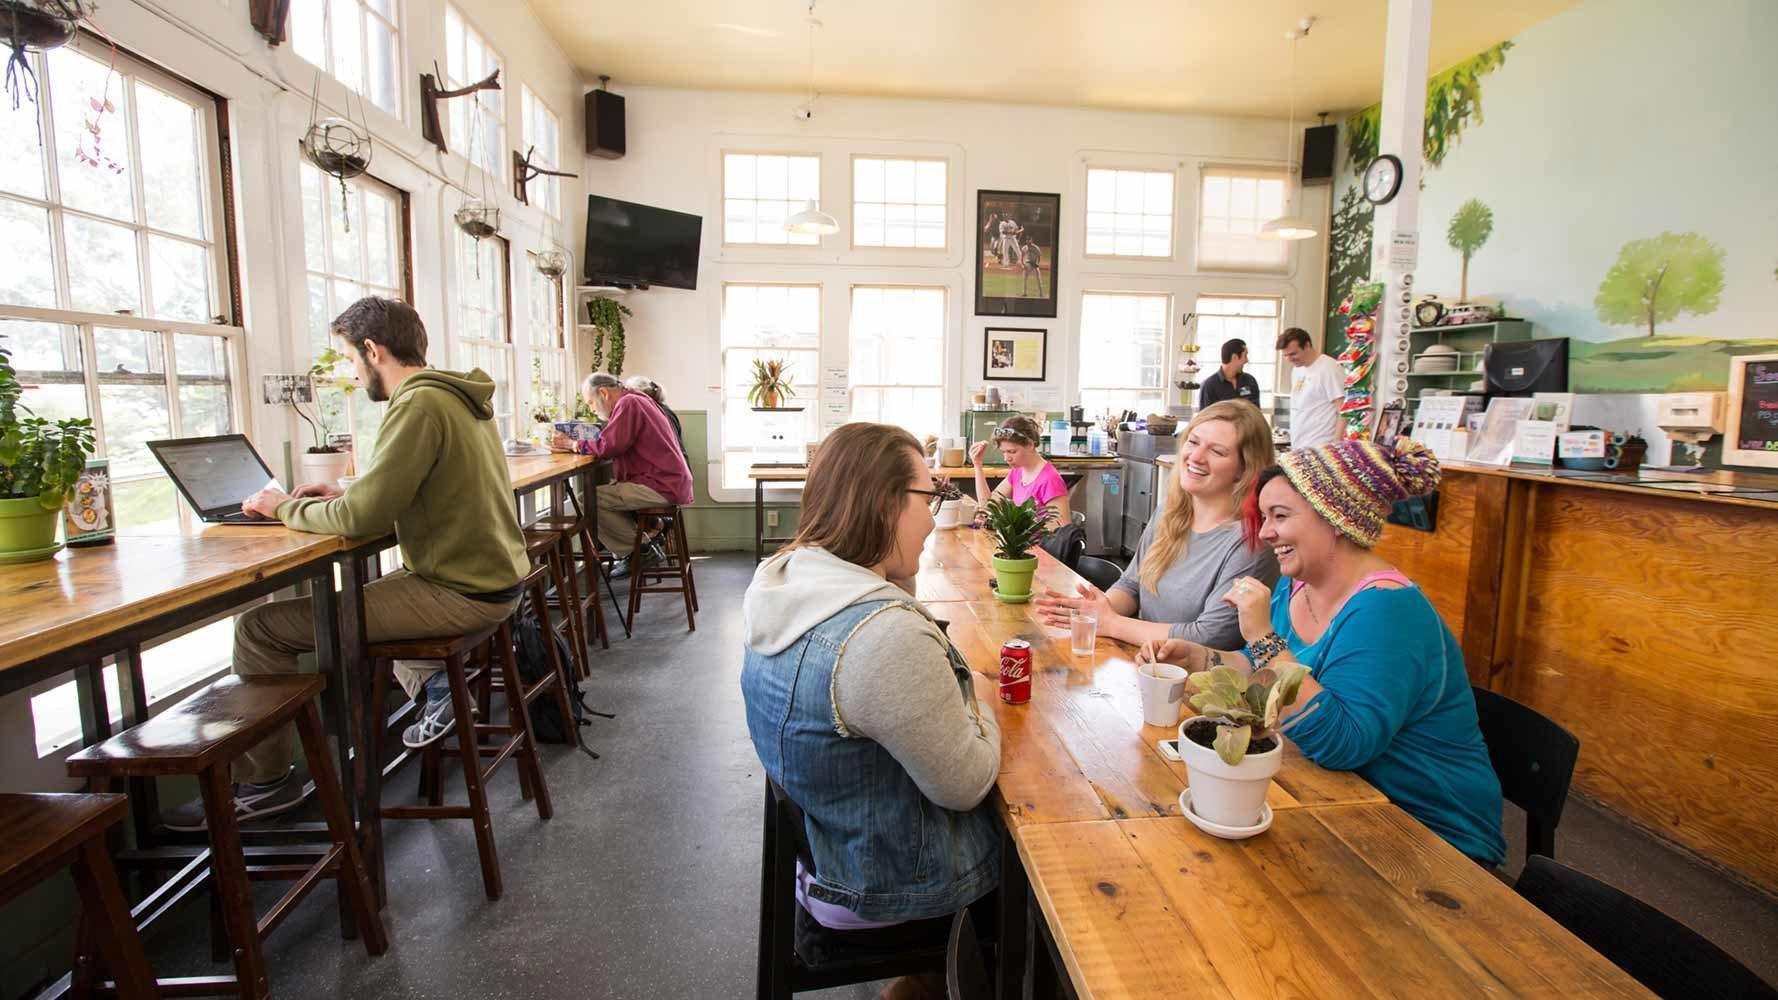 Travellers enjoy the cafe at HI San Francisco Fisherman’s Wharf Hostel, where a private room costs less than US$100 on some nights and the rate includes Wi-fi, breakfast and luggage storage. More travellers are considering hostels as alternatives to hotels and Airbnbs.